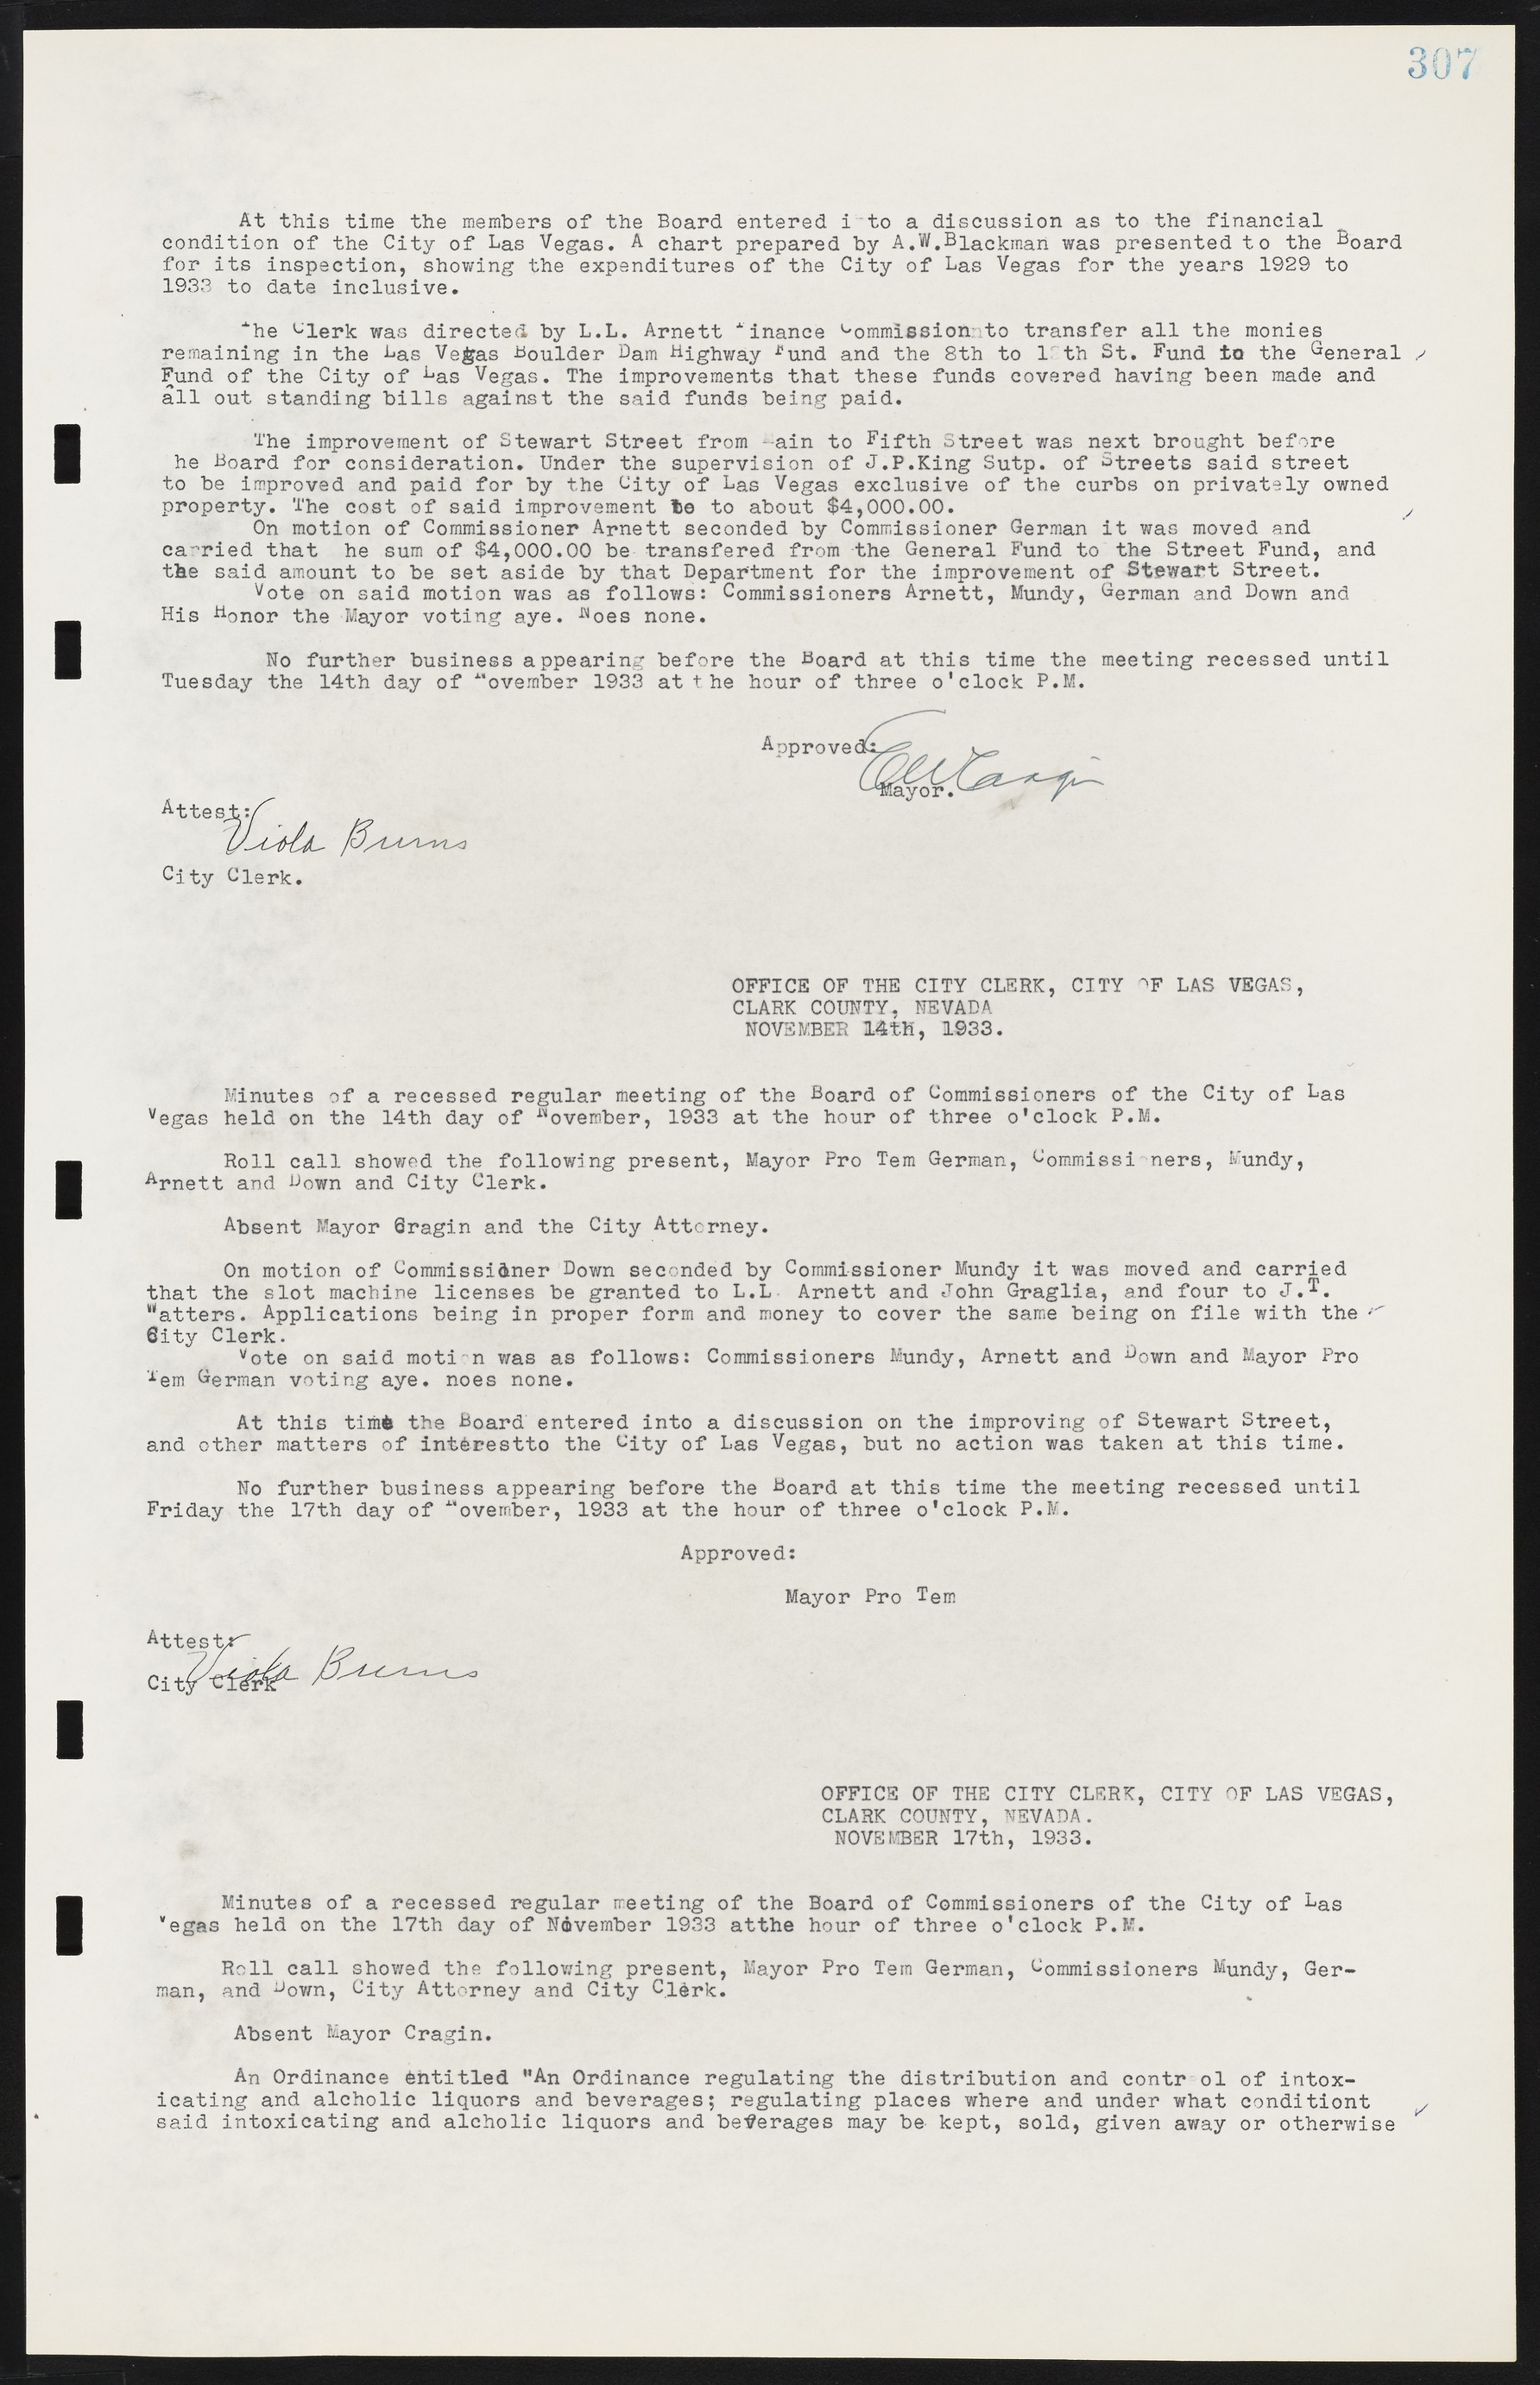 Las Vegas City Commission Minutes, May 14, 1929 to February 11, 1937, lvc000003-314